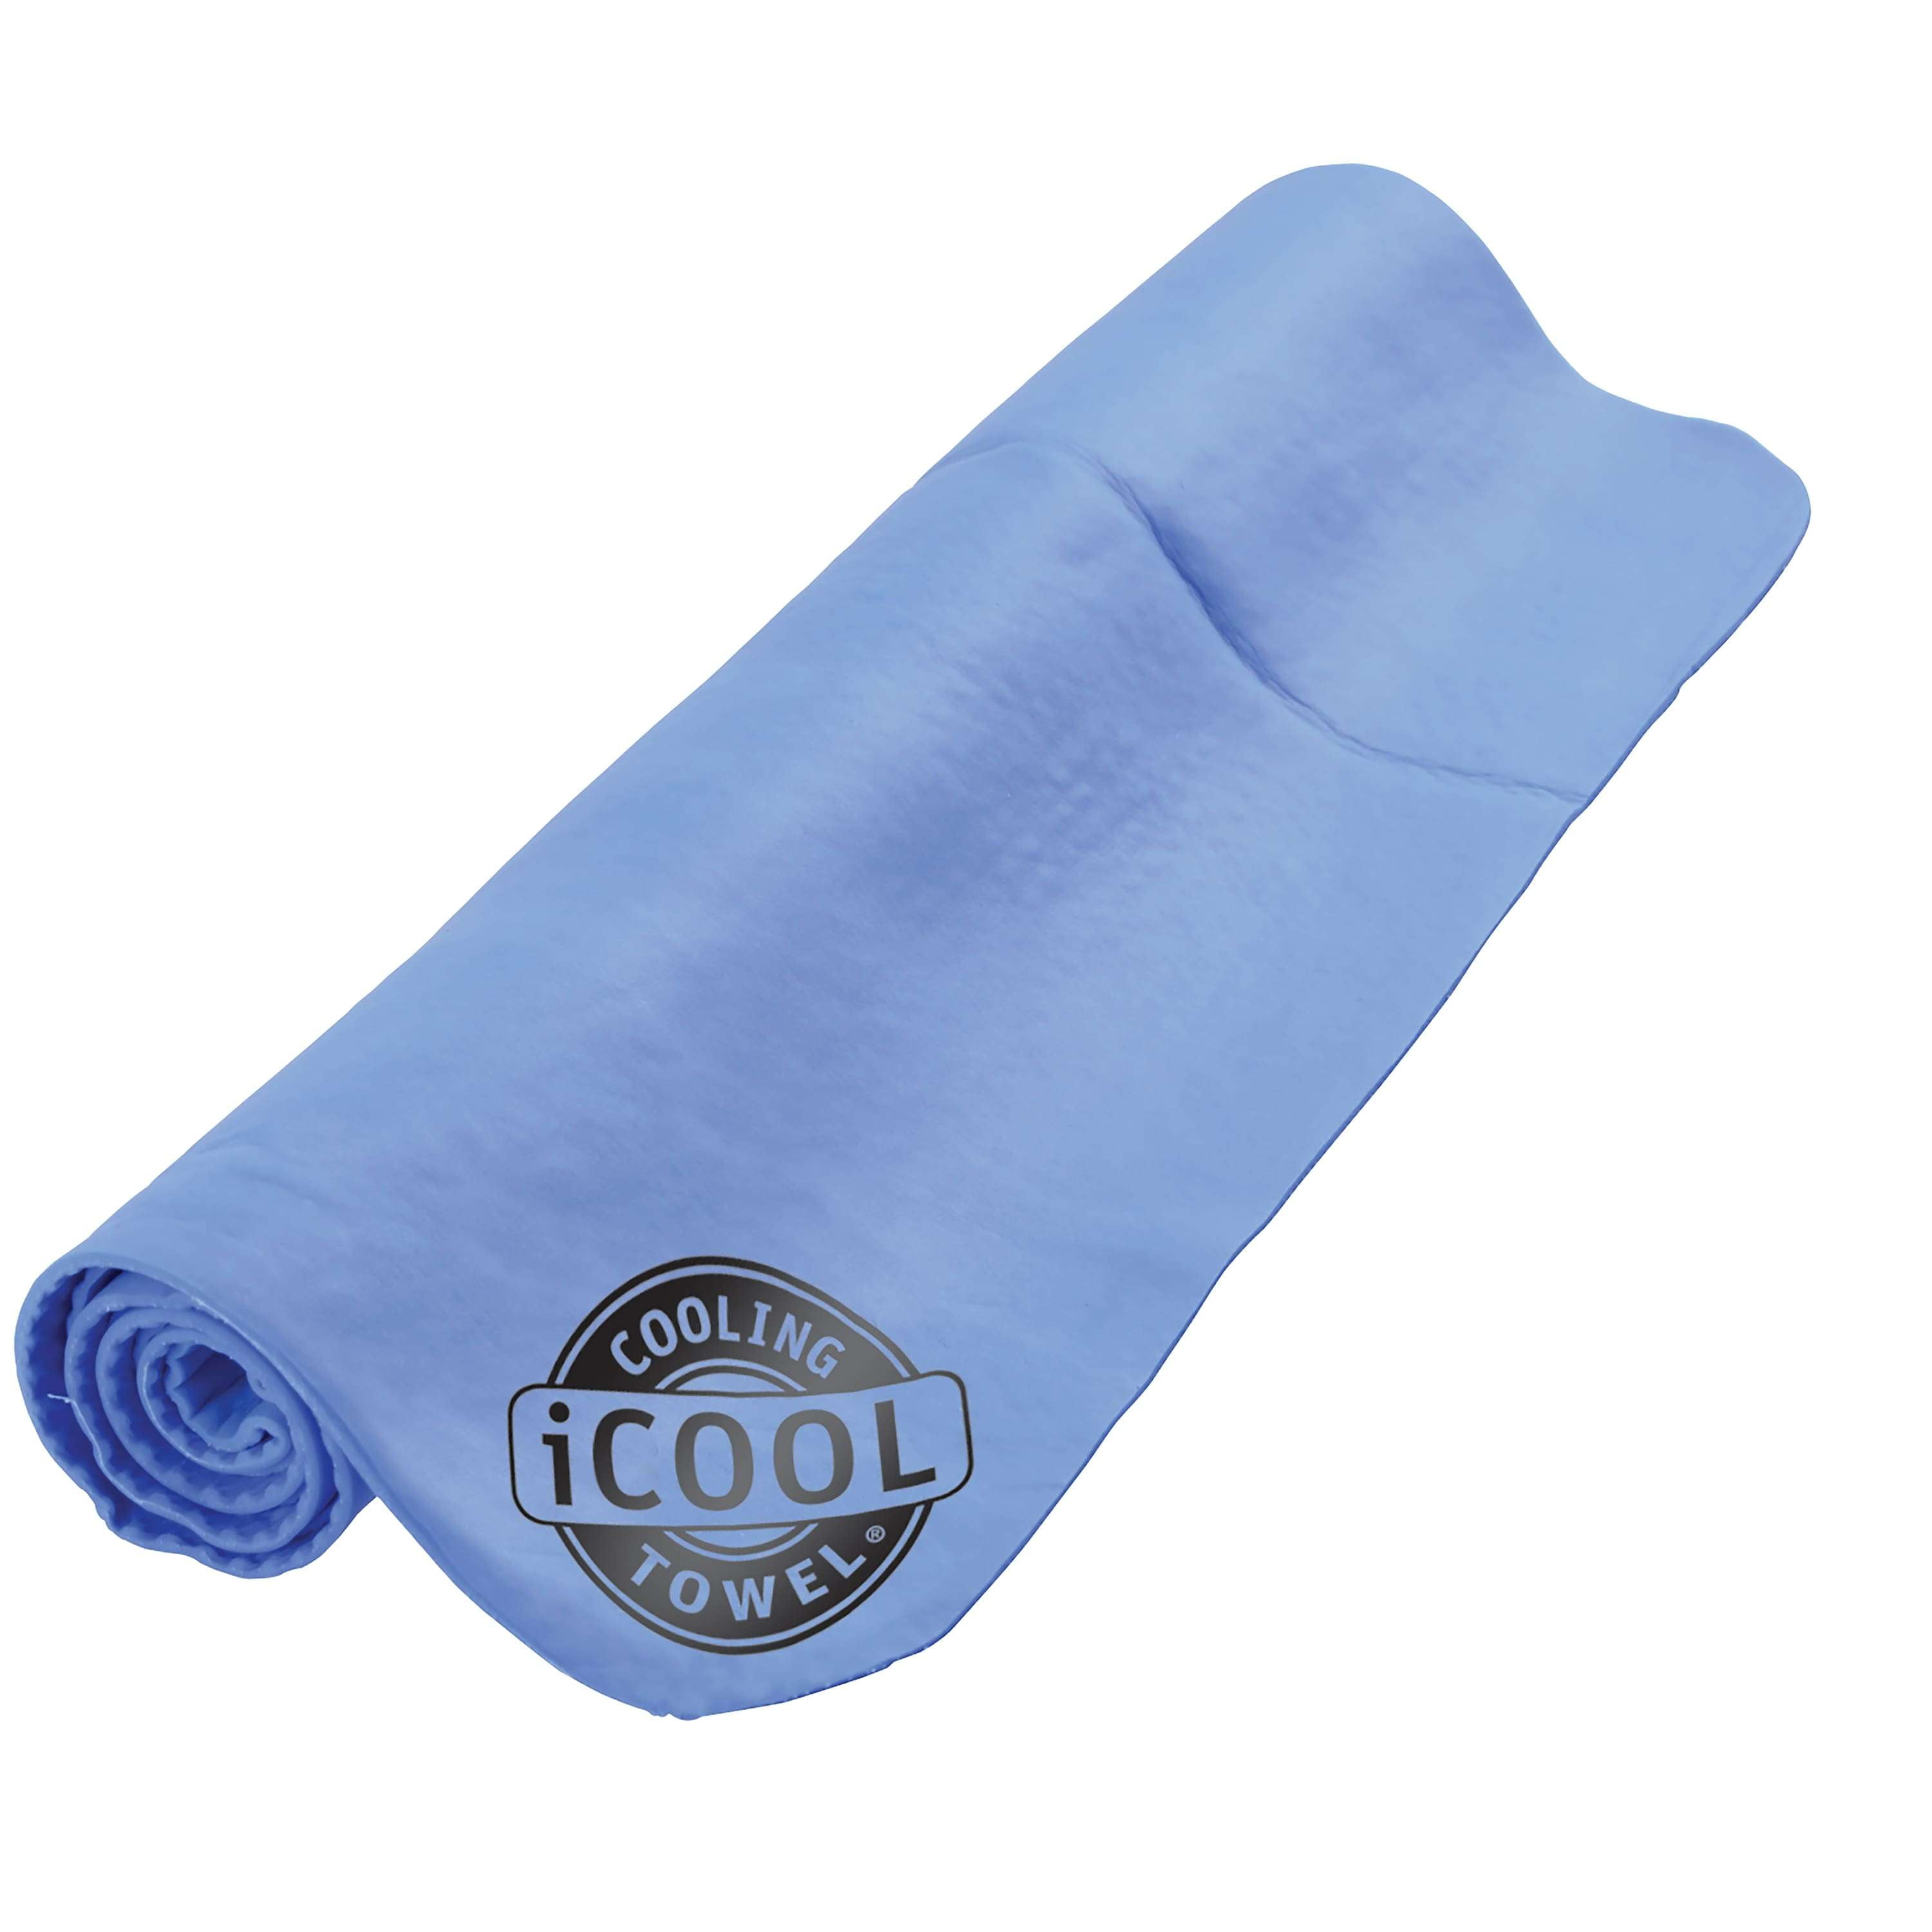 2 x Cooling end TOWEL SPORTS COOLING TOWEL BLUE Cooling Towel Fitness Cooling Towel 